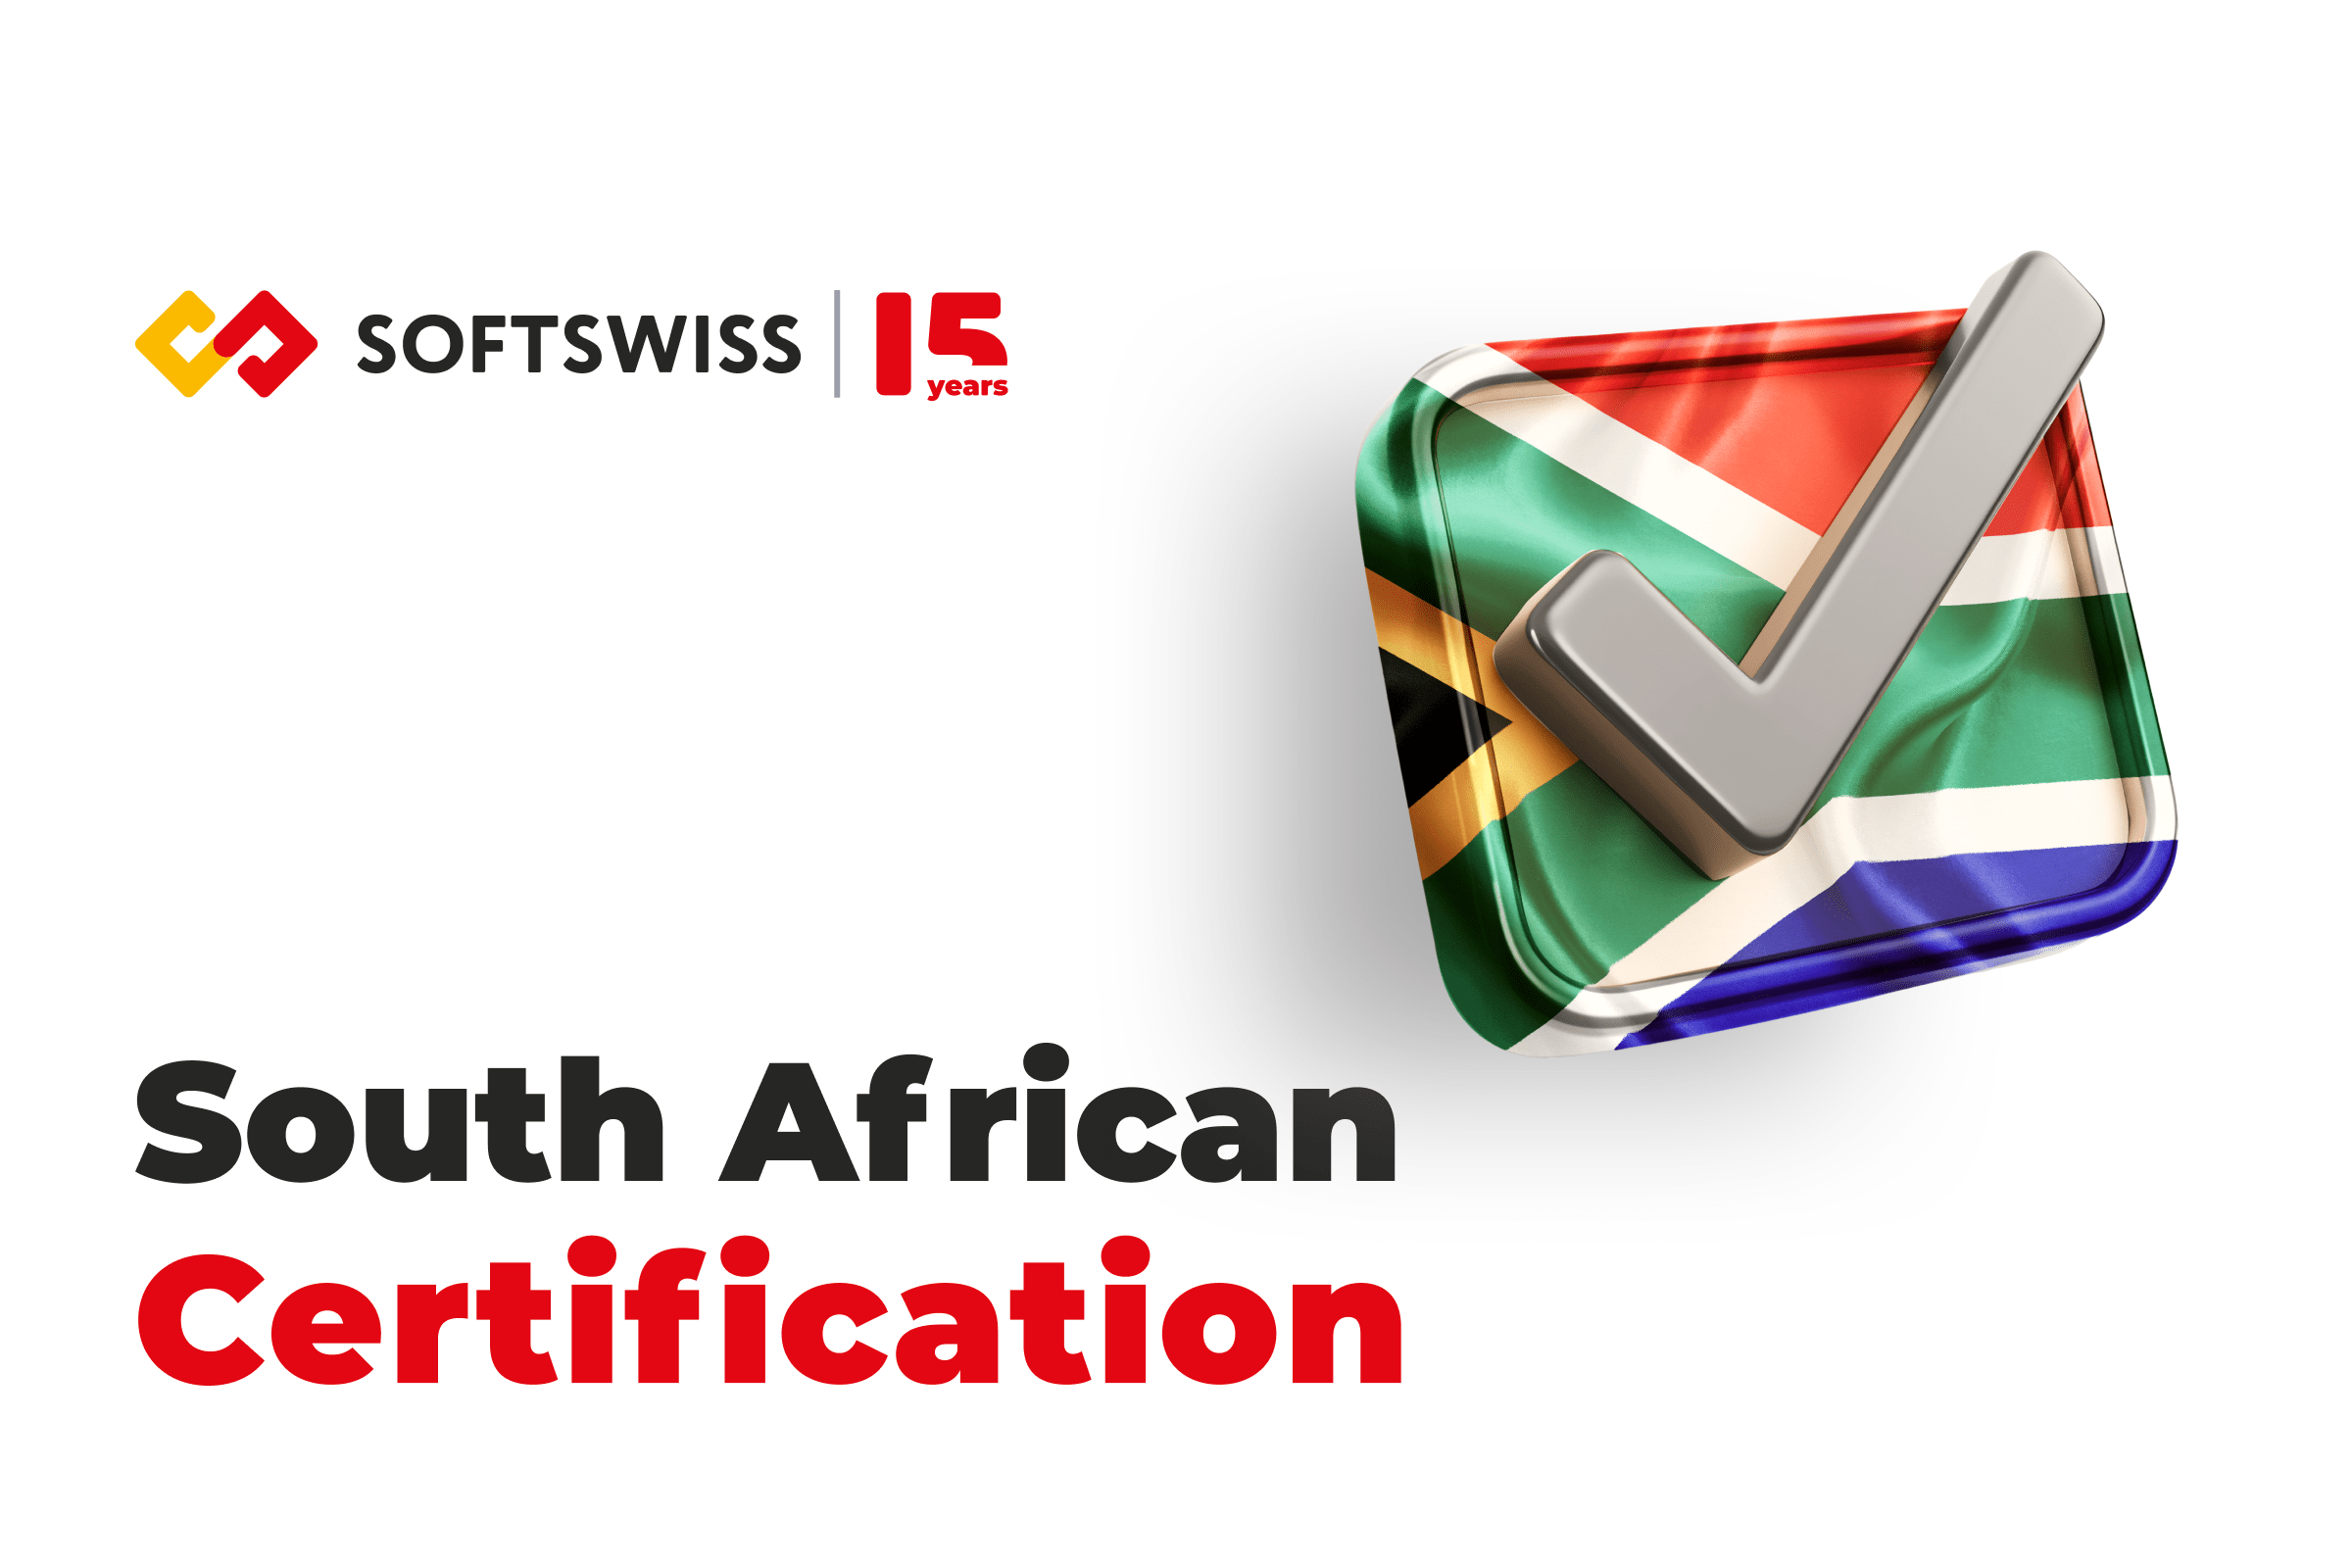 SOFTSWISS Expands in South Africa with New Certifications